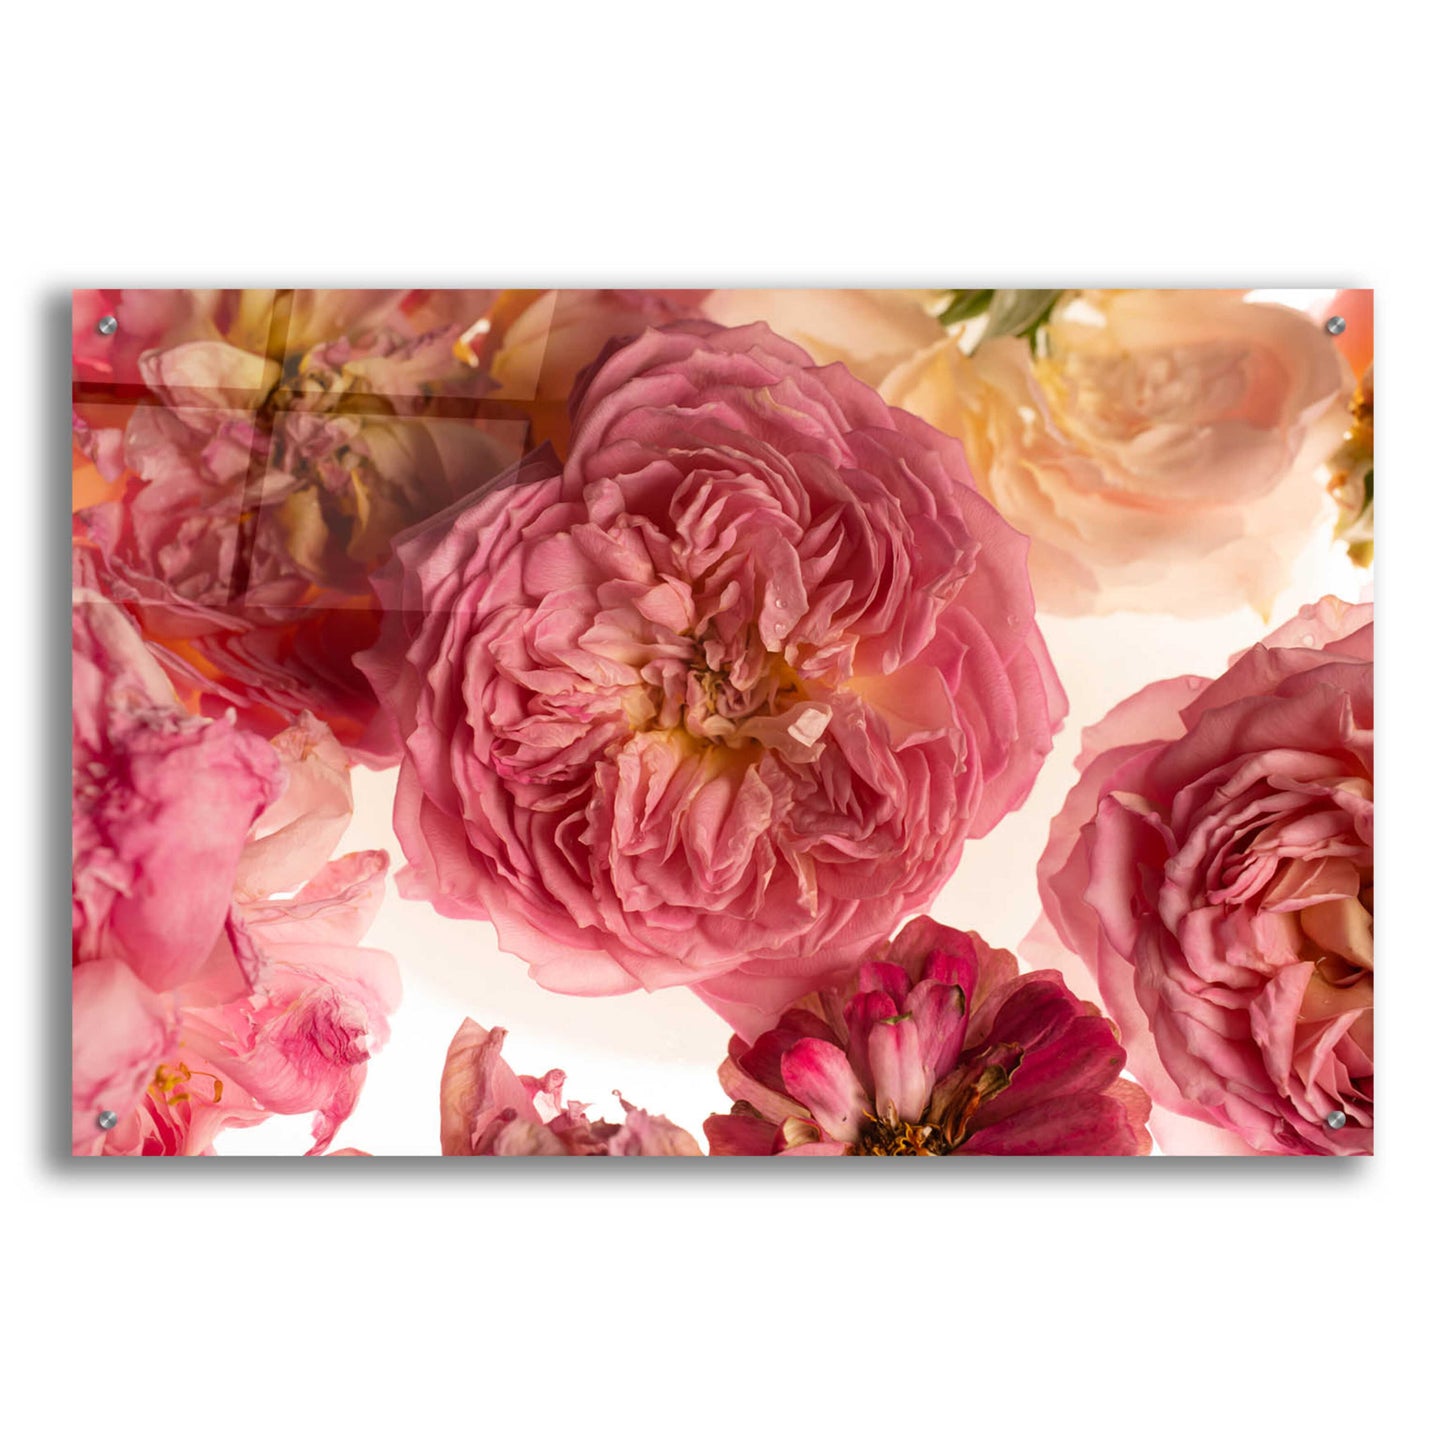 Epic Art 'Rose on White' by Leah McLean, Acrylic Glass Wall Art,36x24